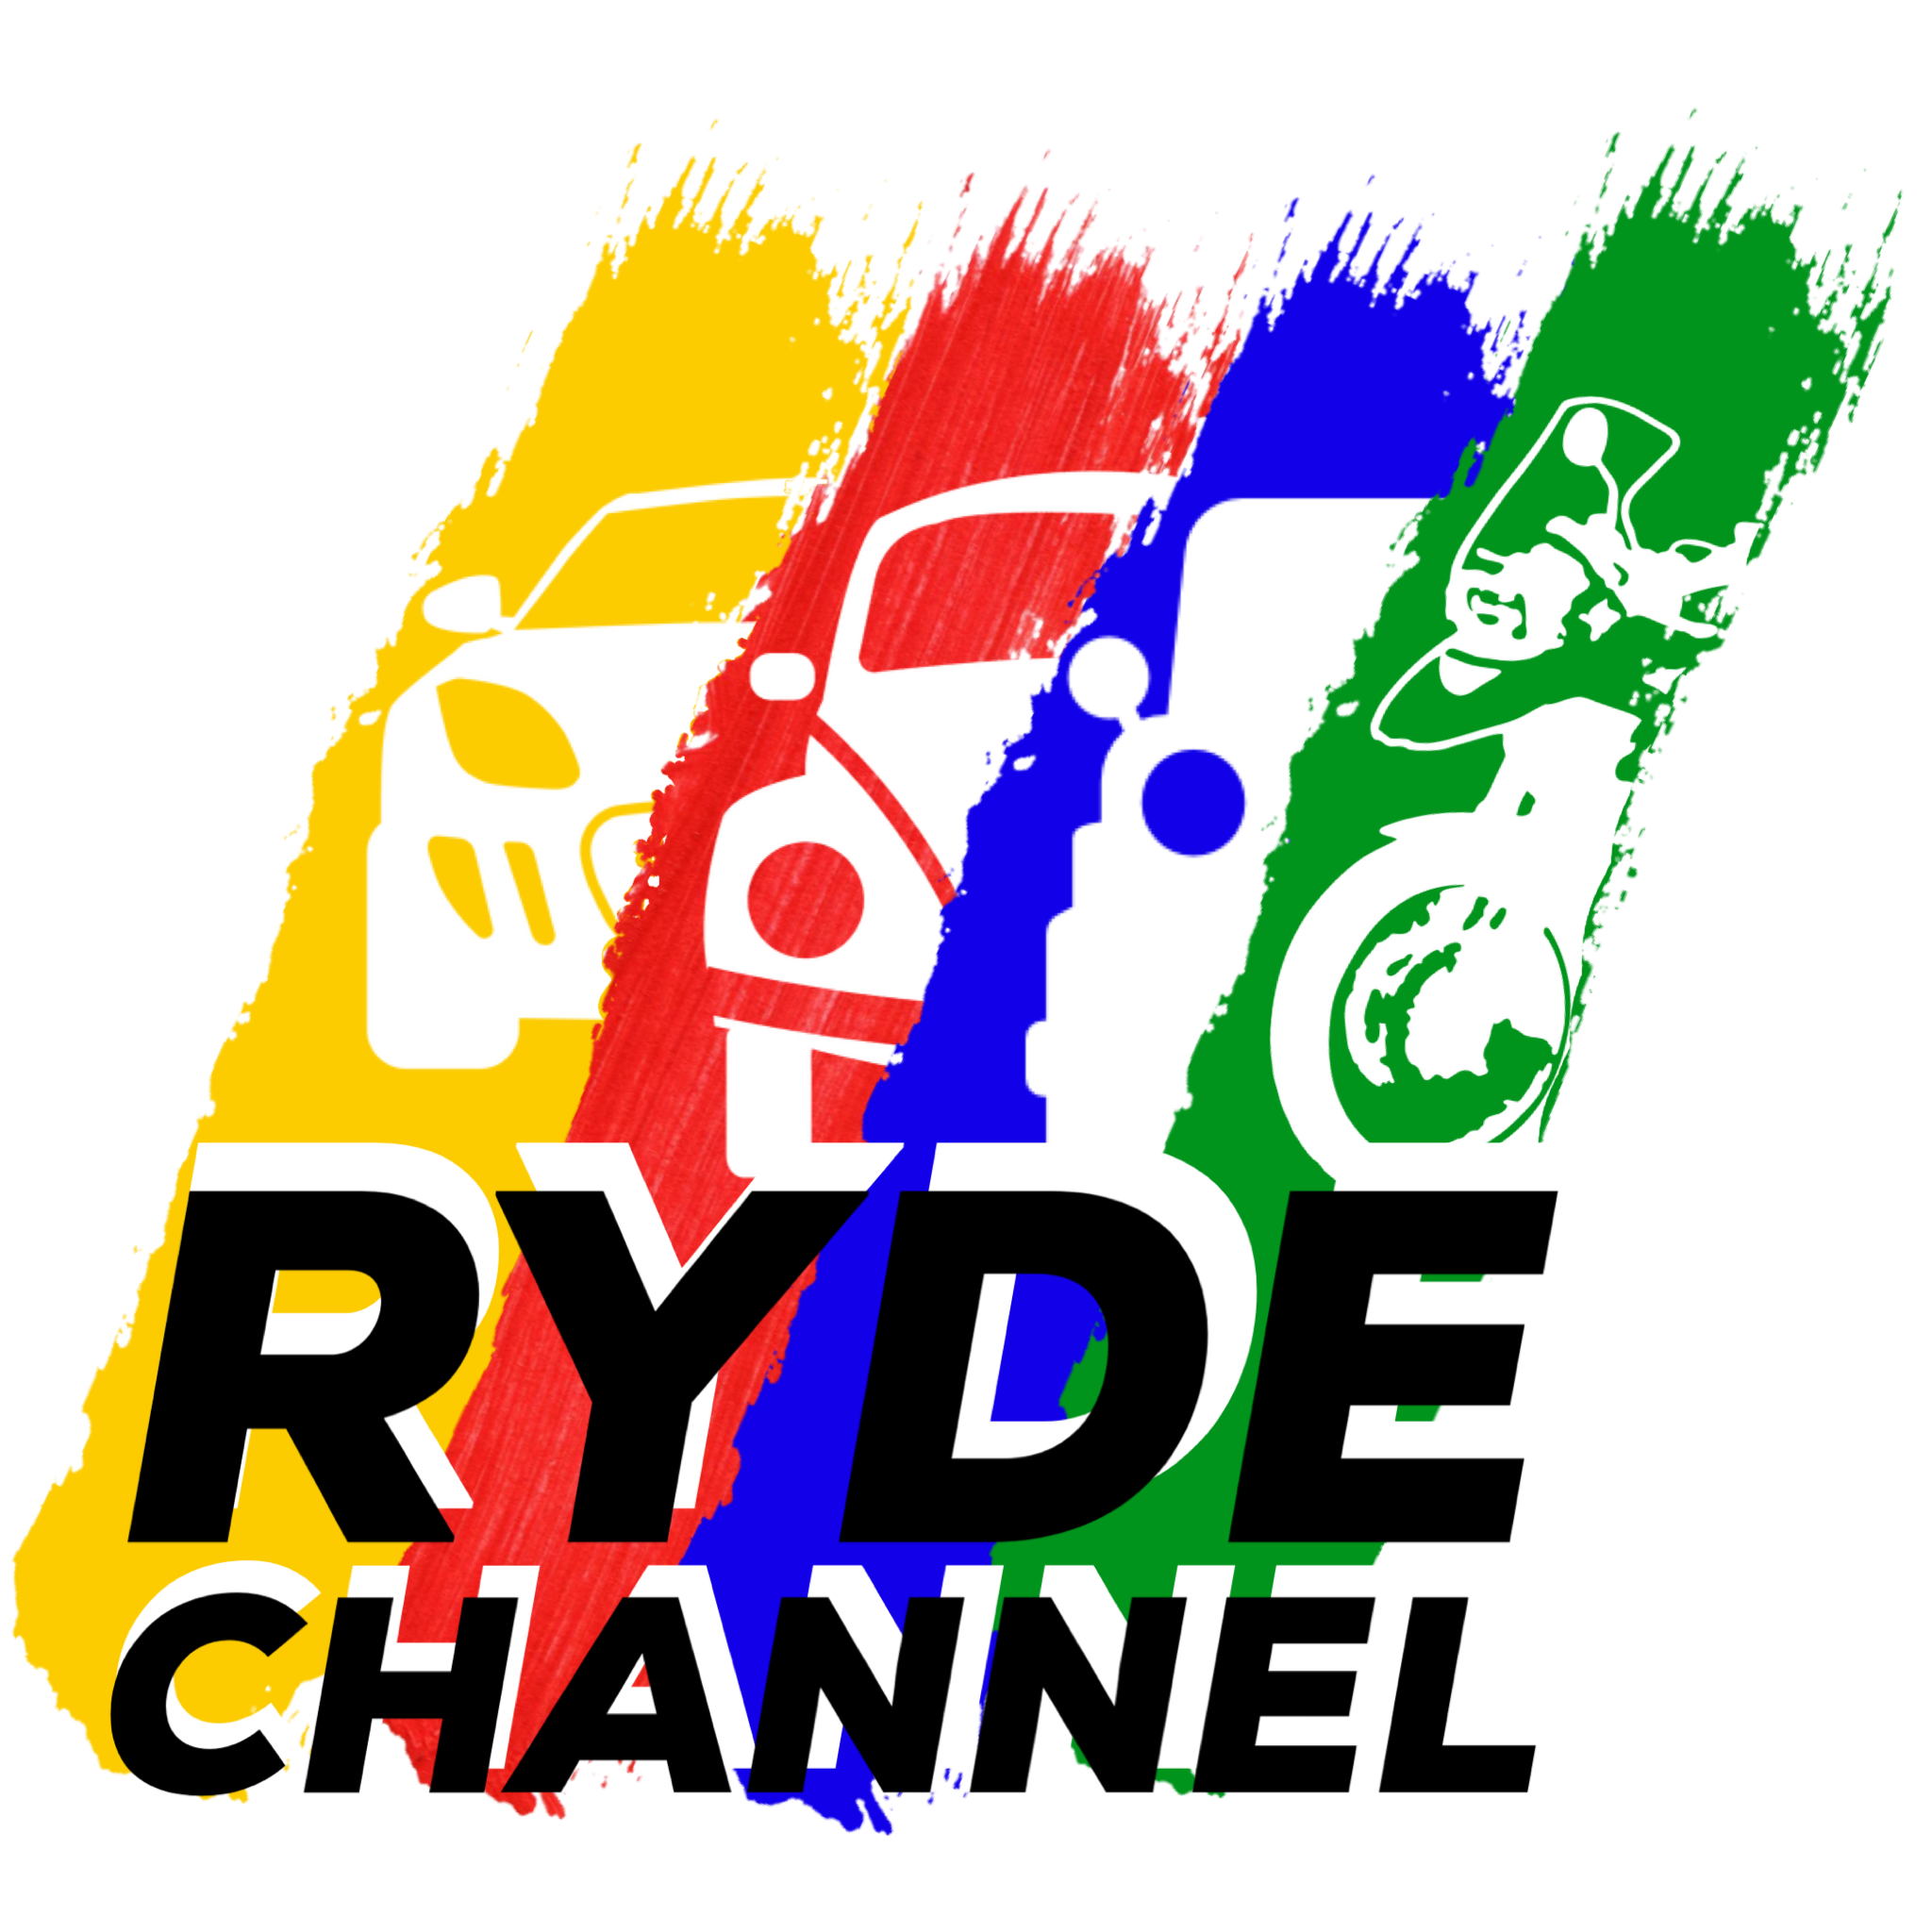 Ryde Channel